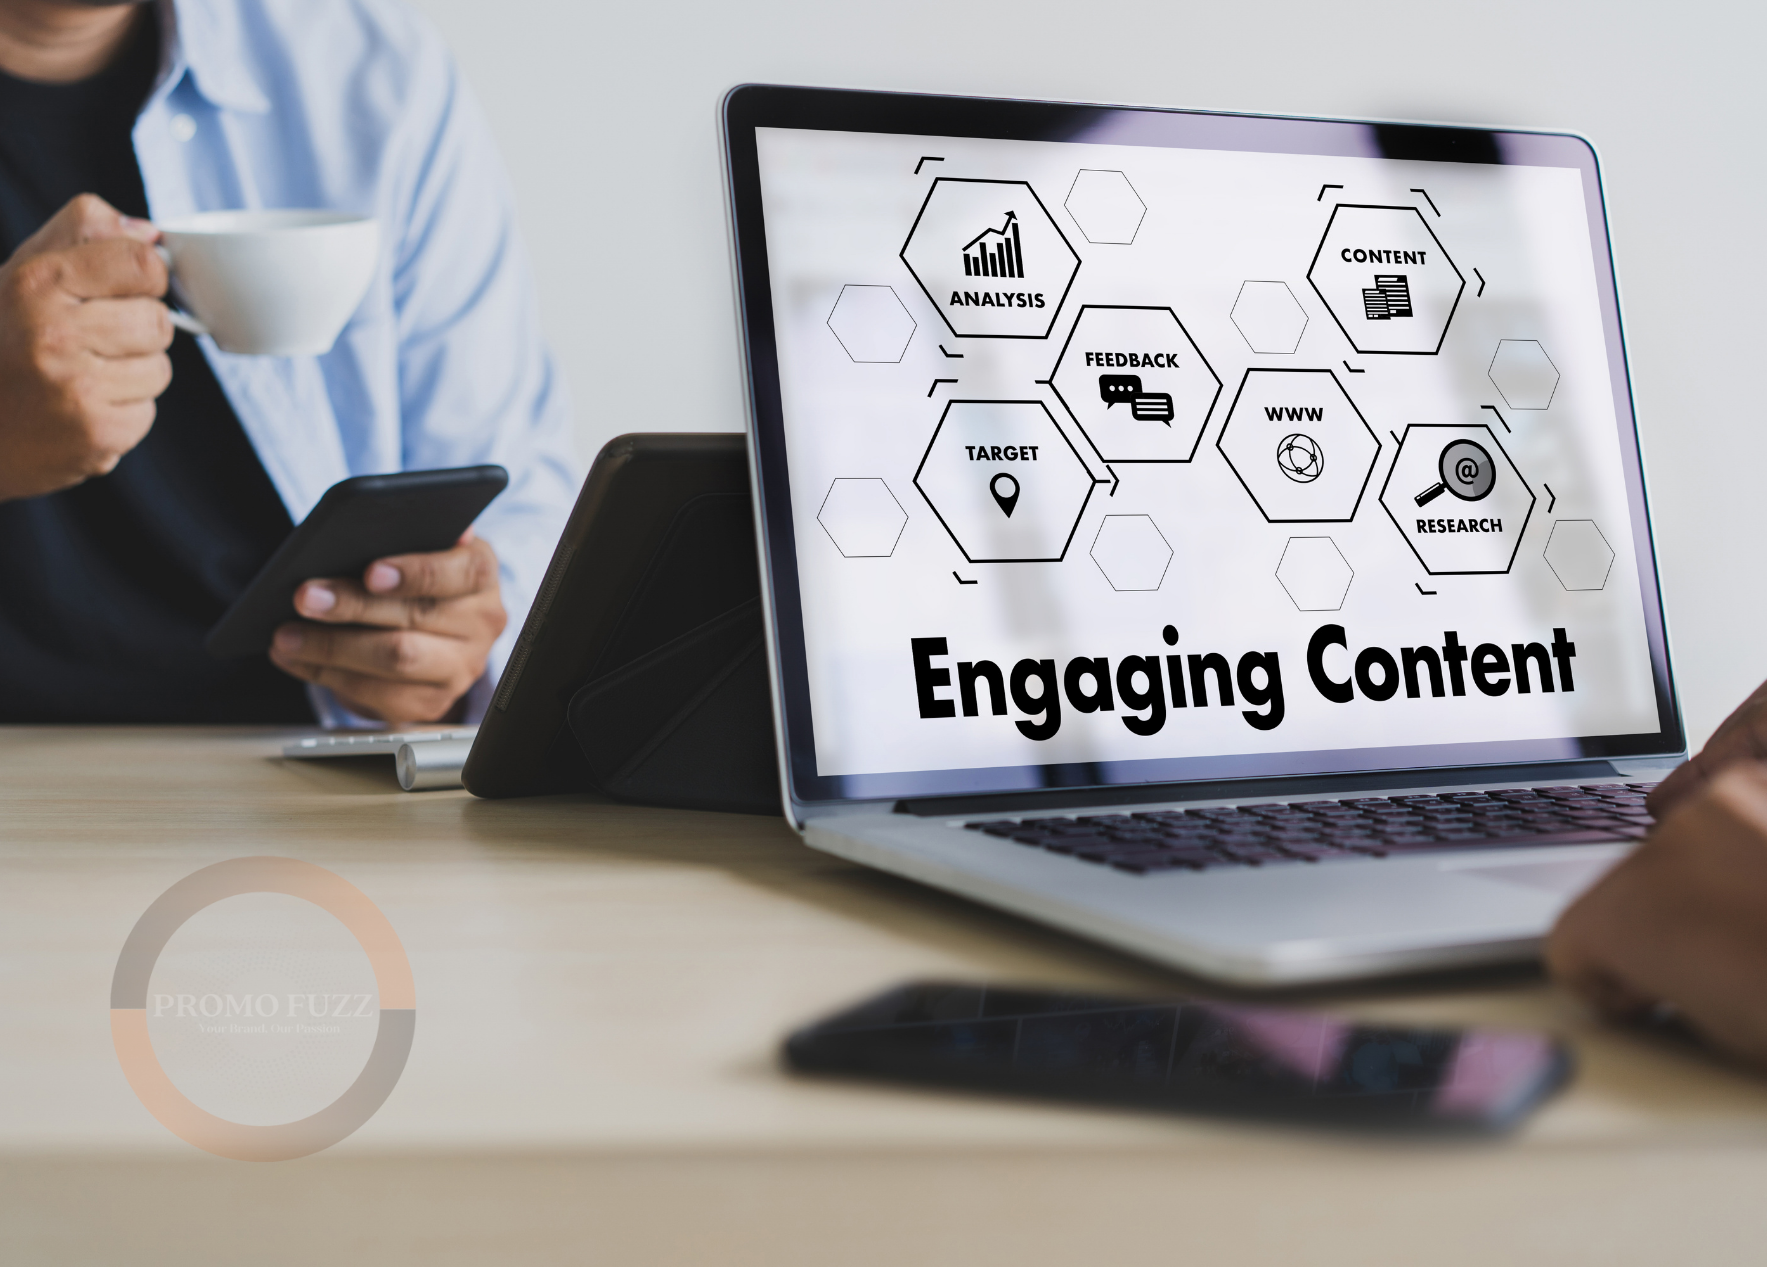 Create engaging content that makes your visitors keep coming back